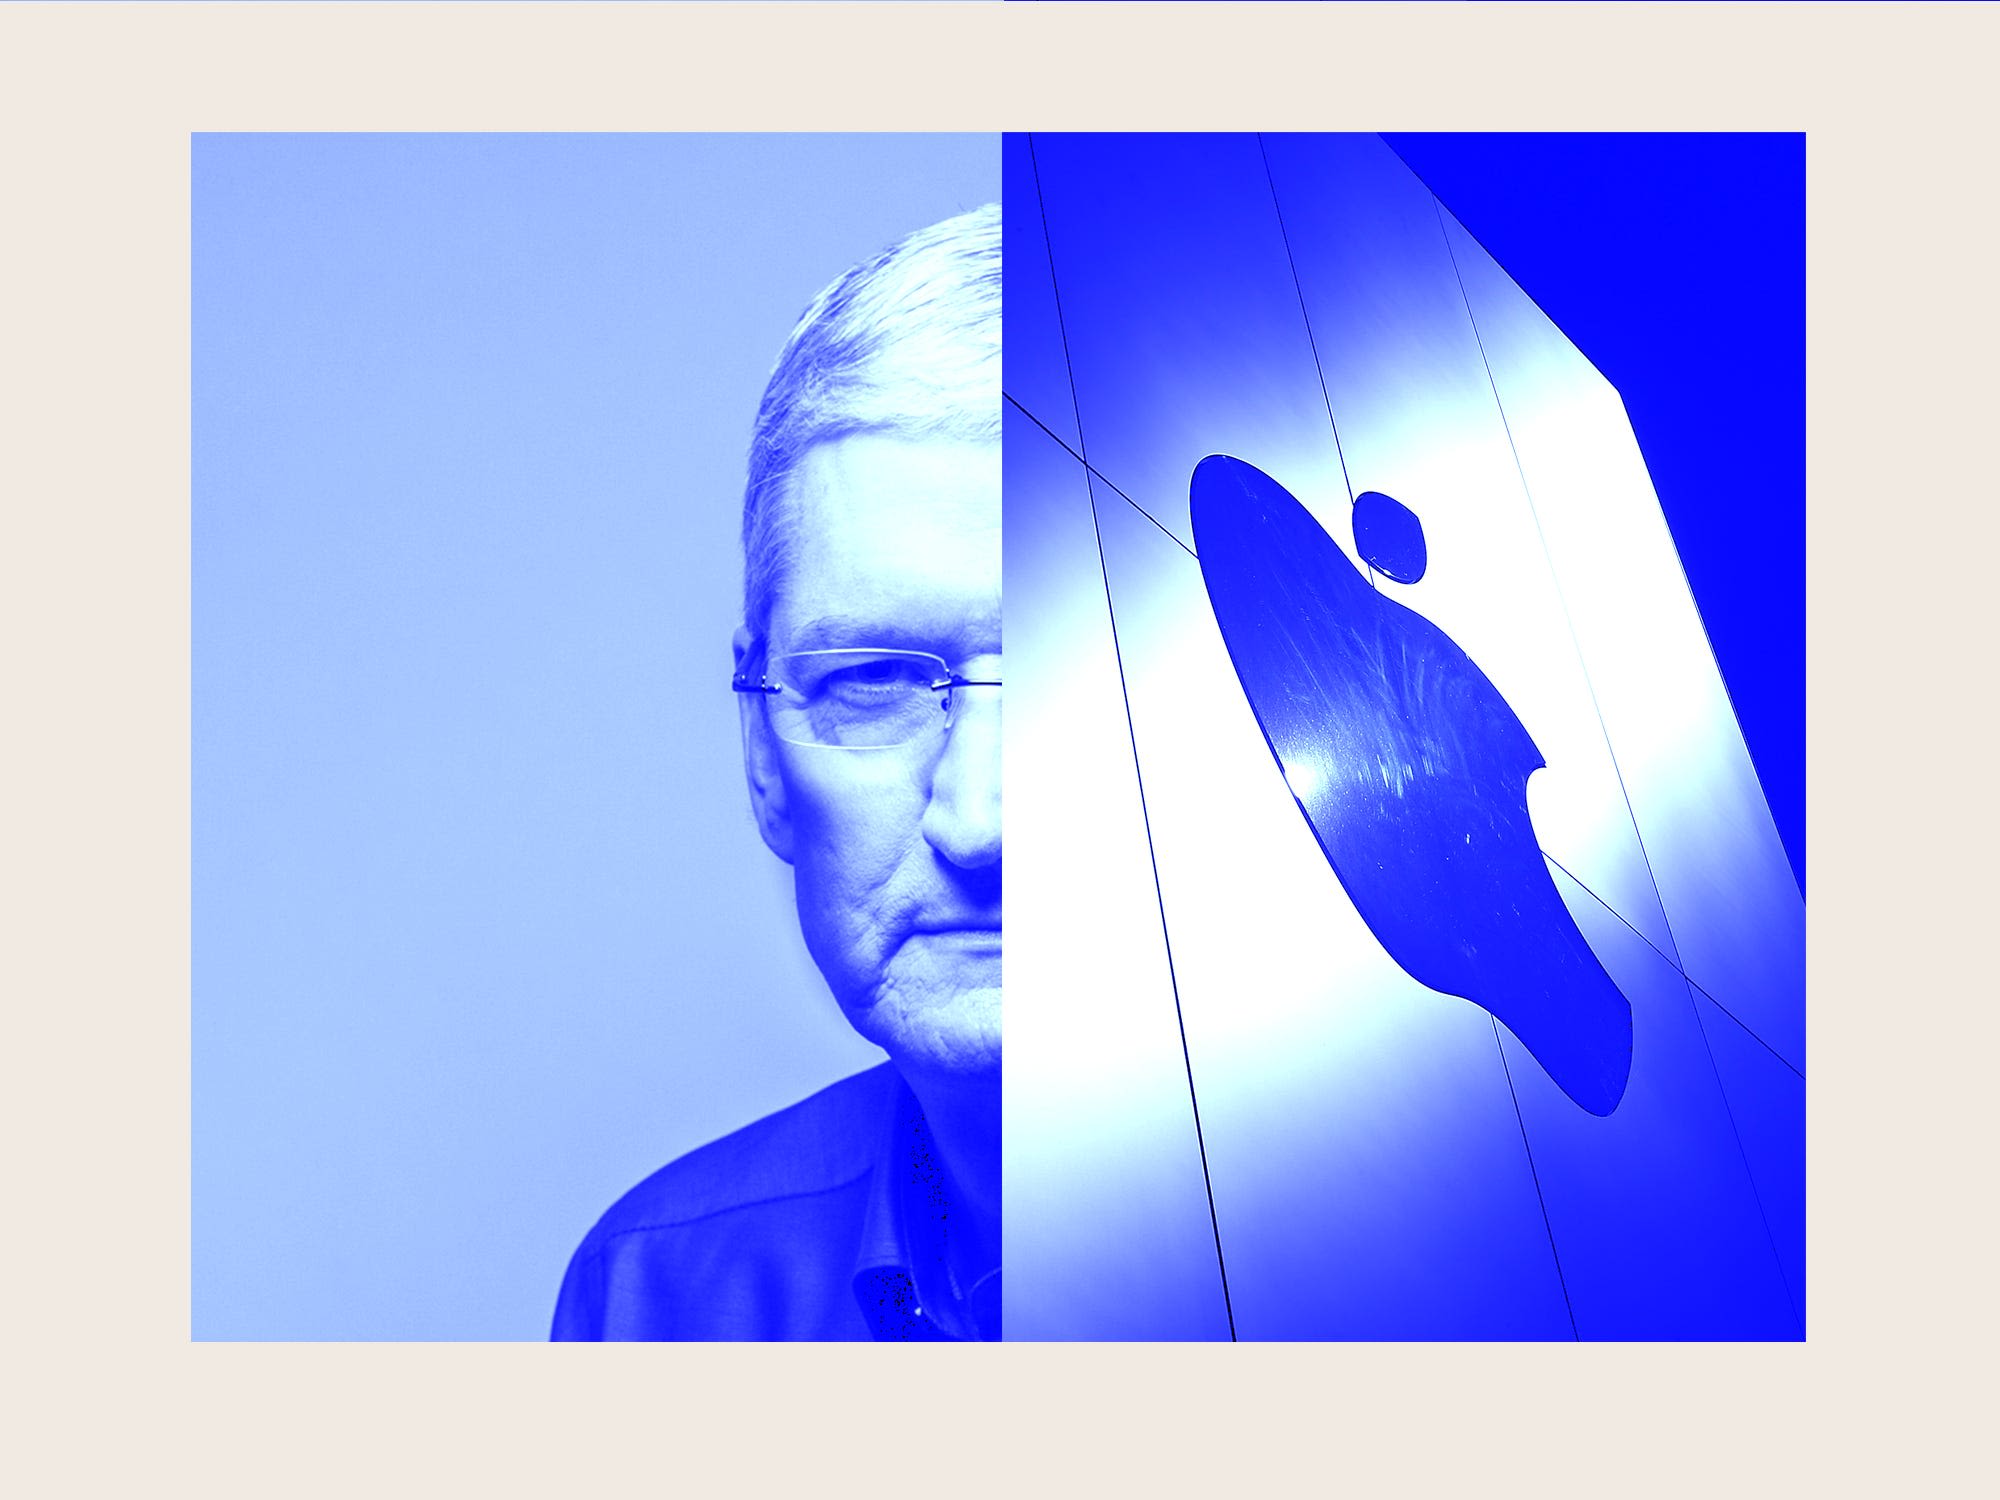 Tim Cook is running out of ideas